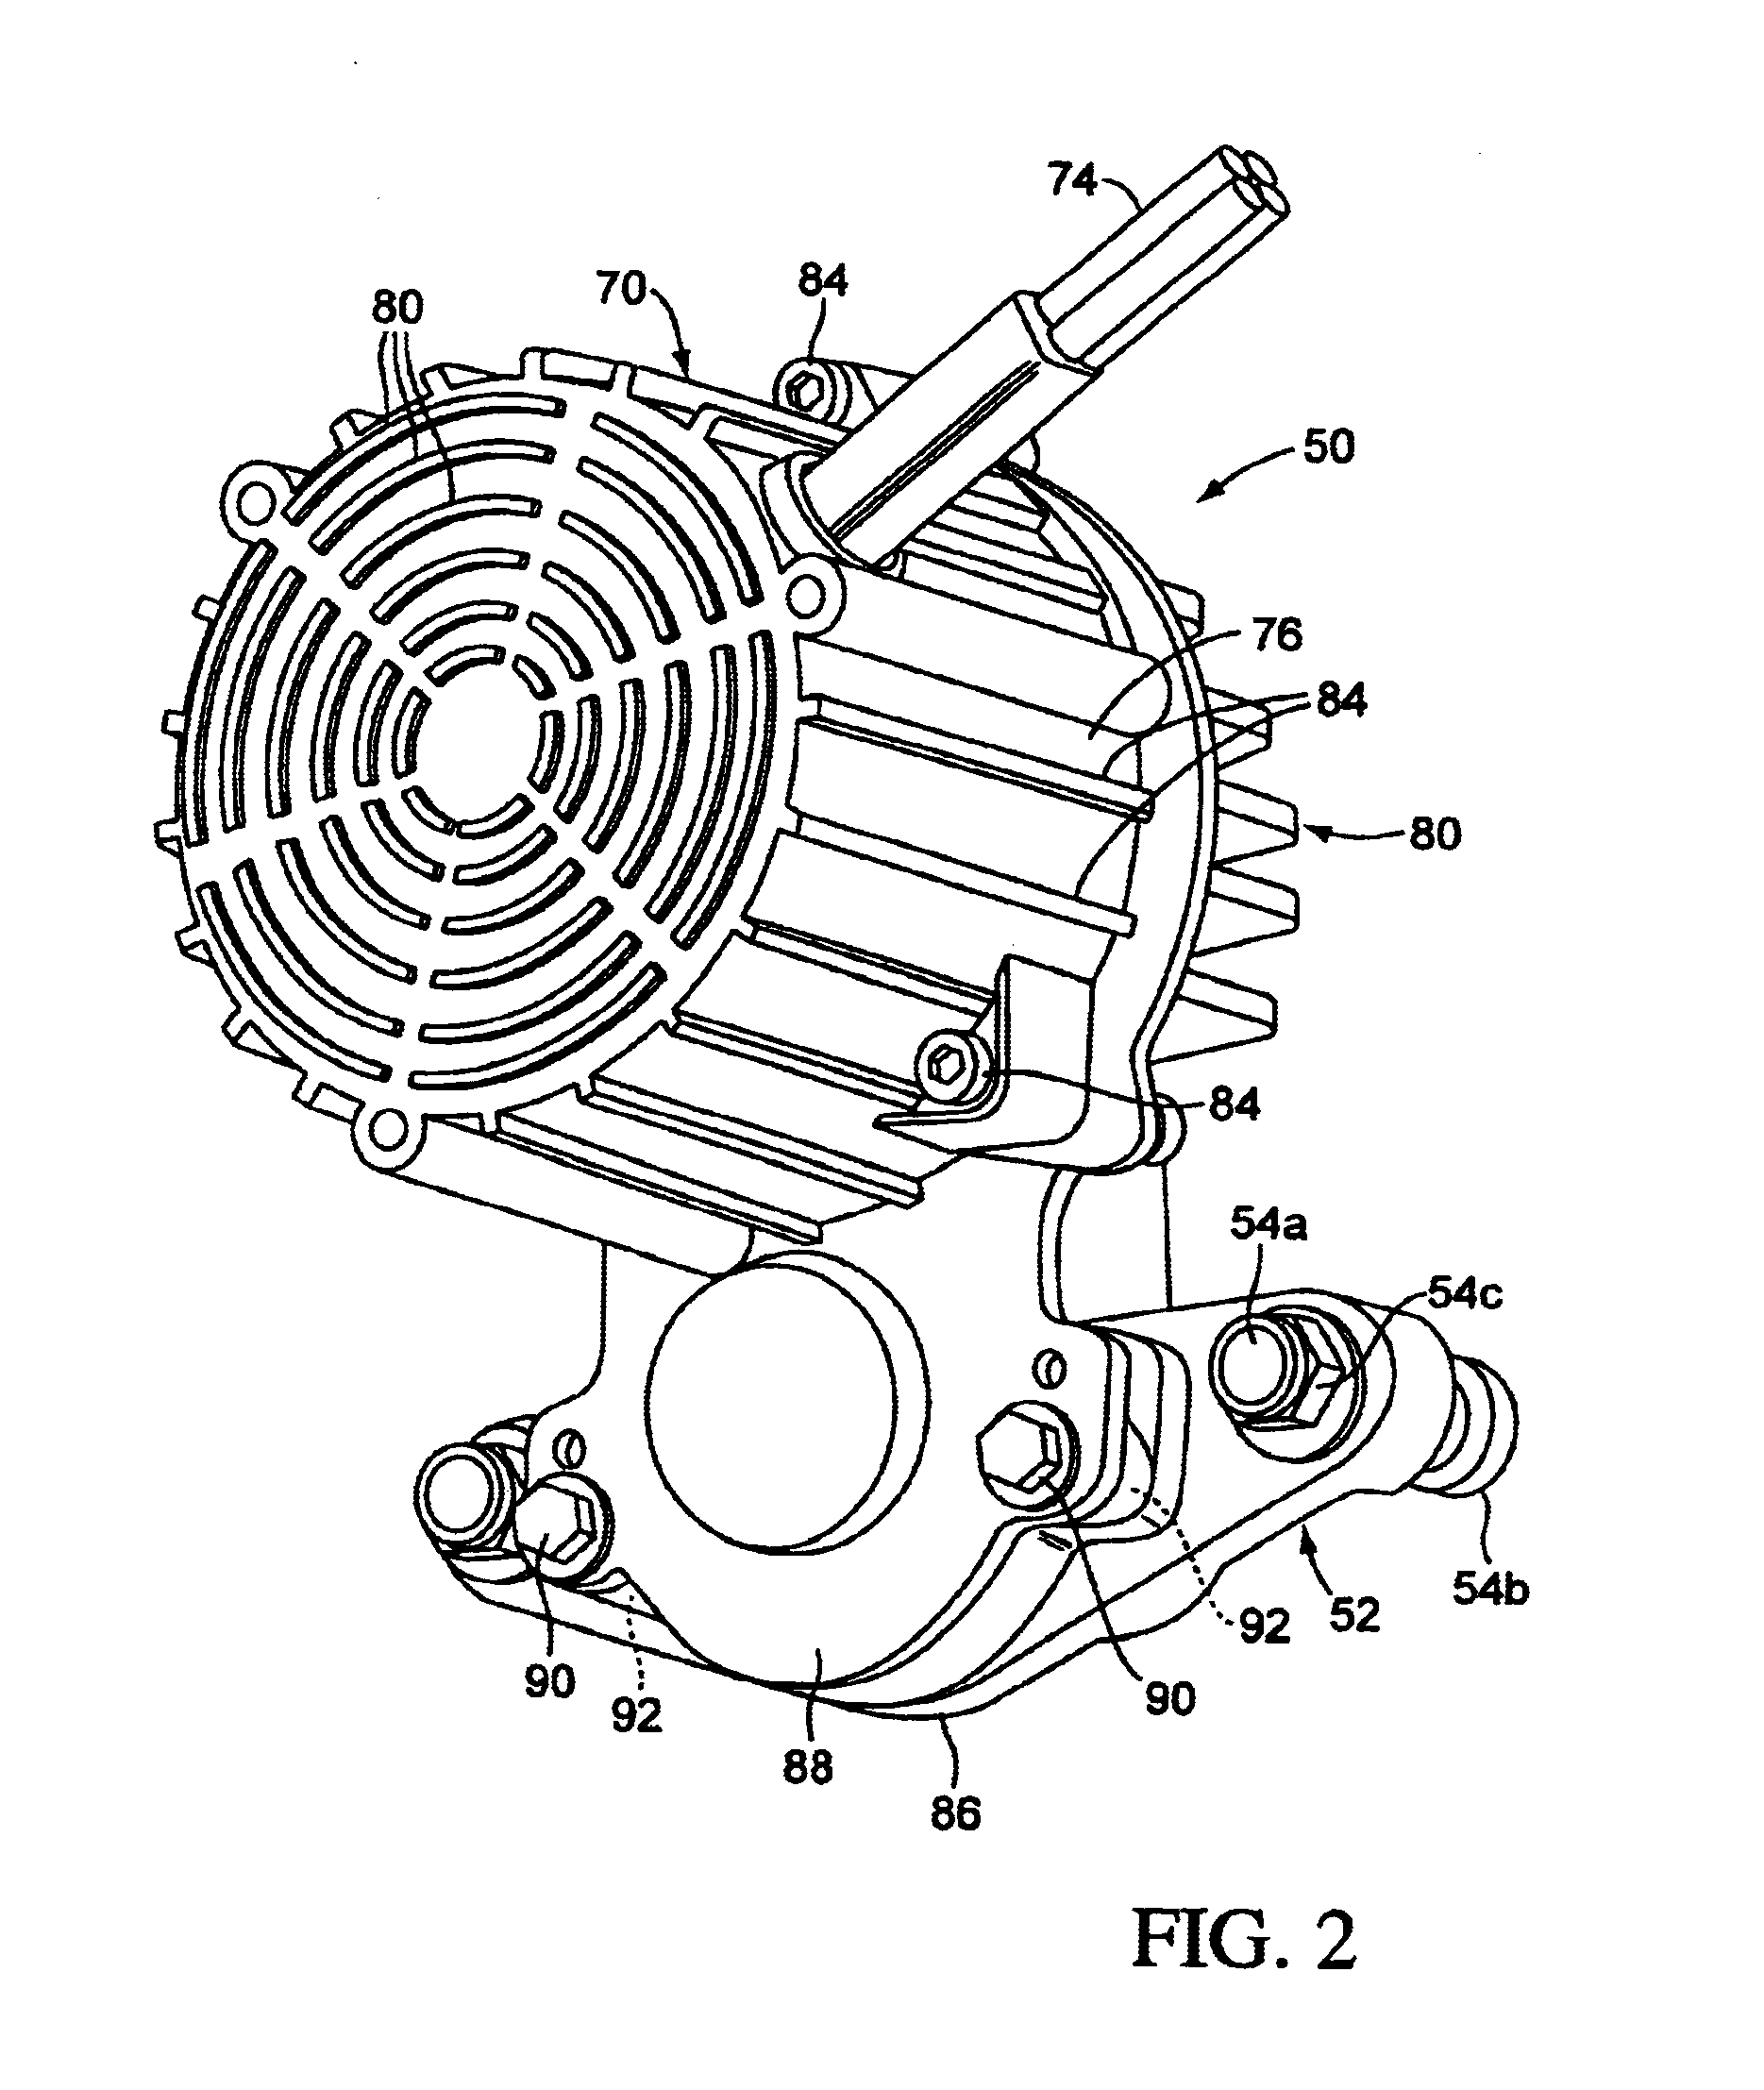 Electric motor drive for a reel mower